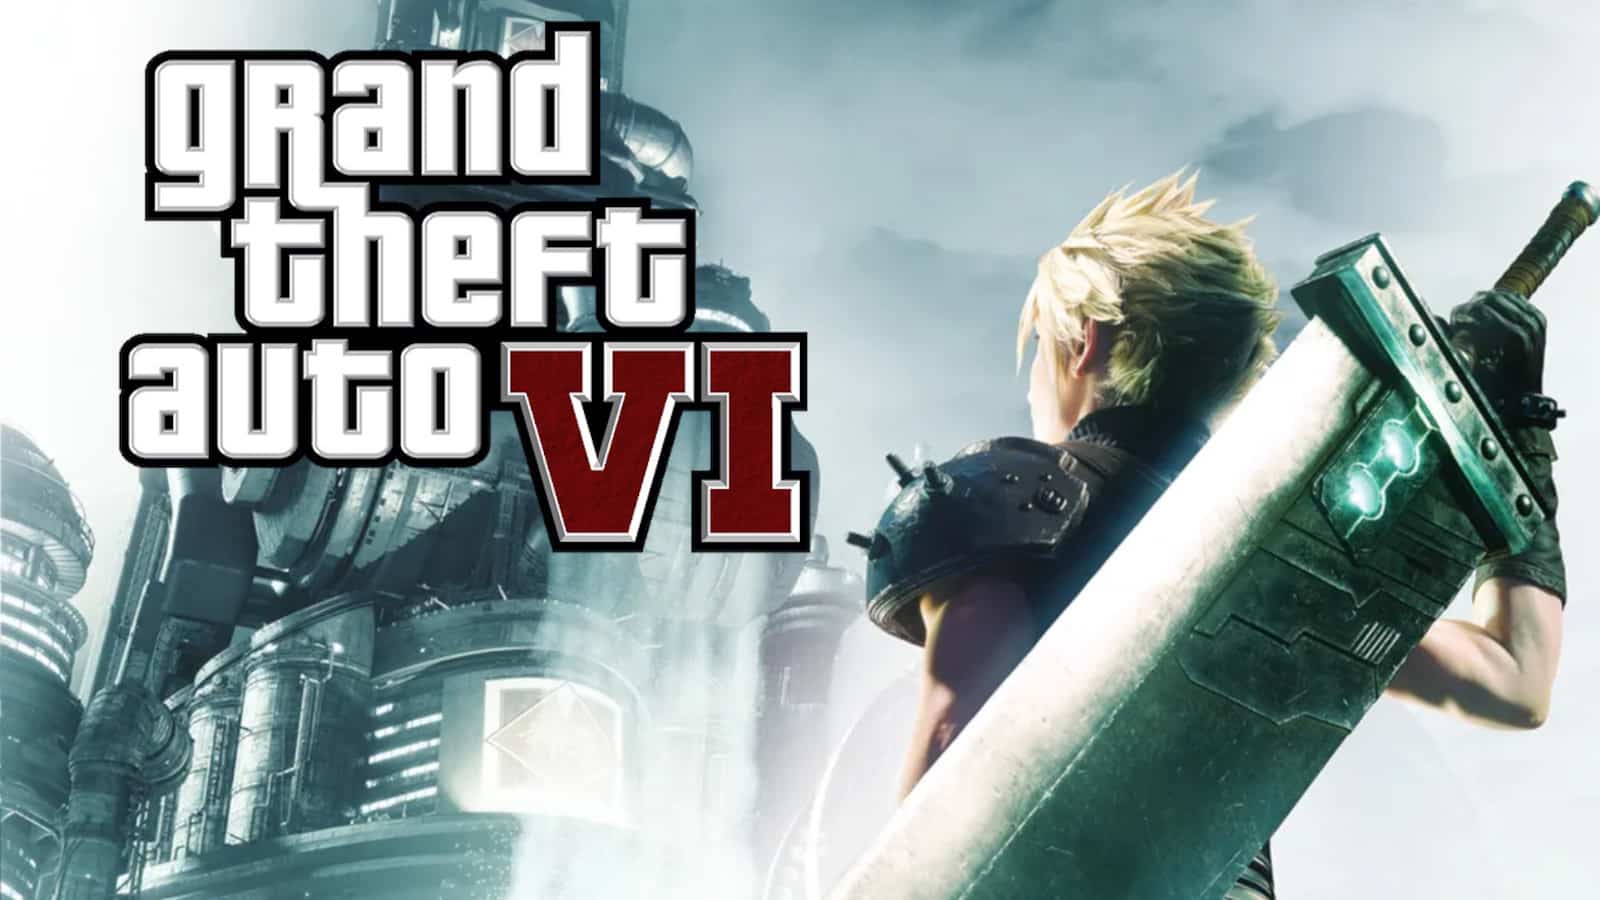 Cloud Strife looks up at the GTA 6 logo